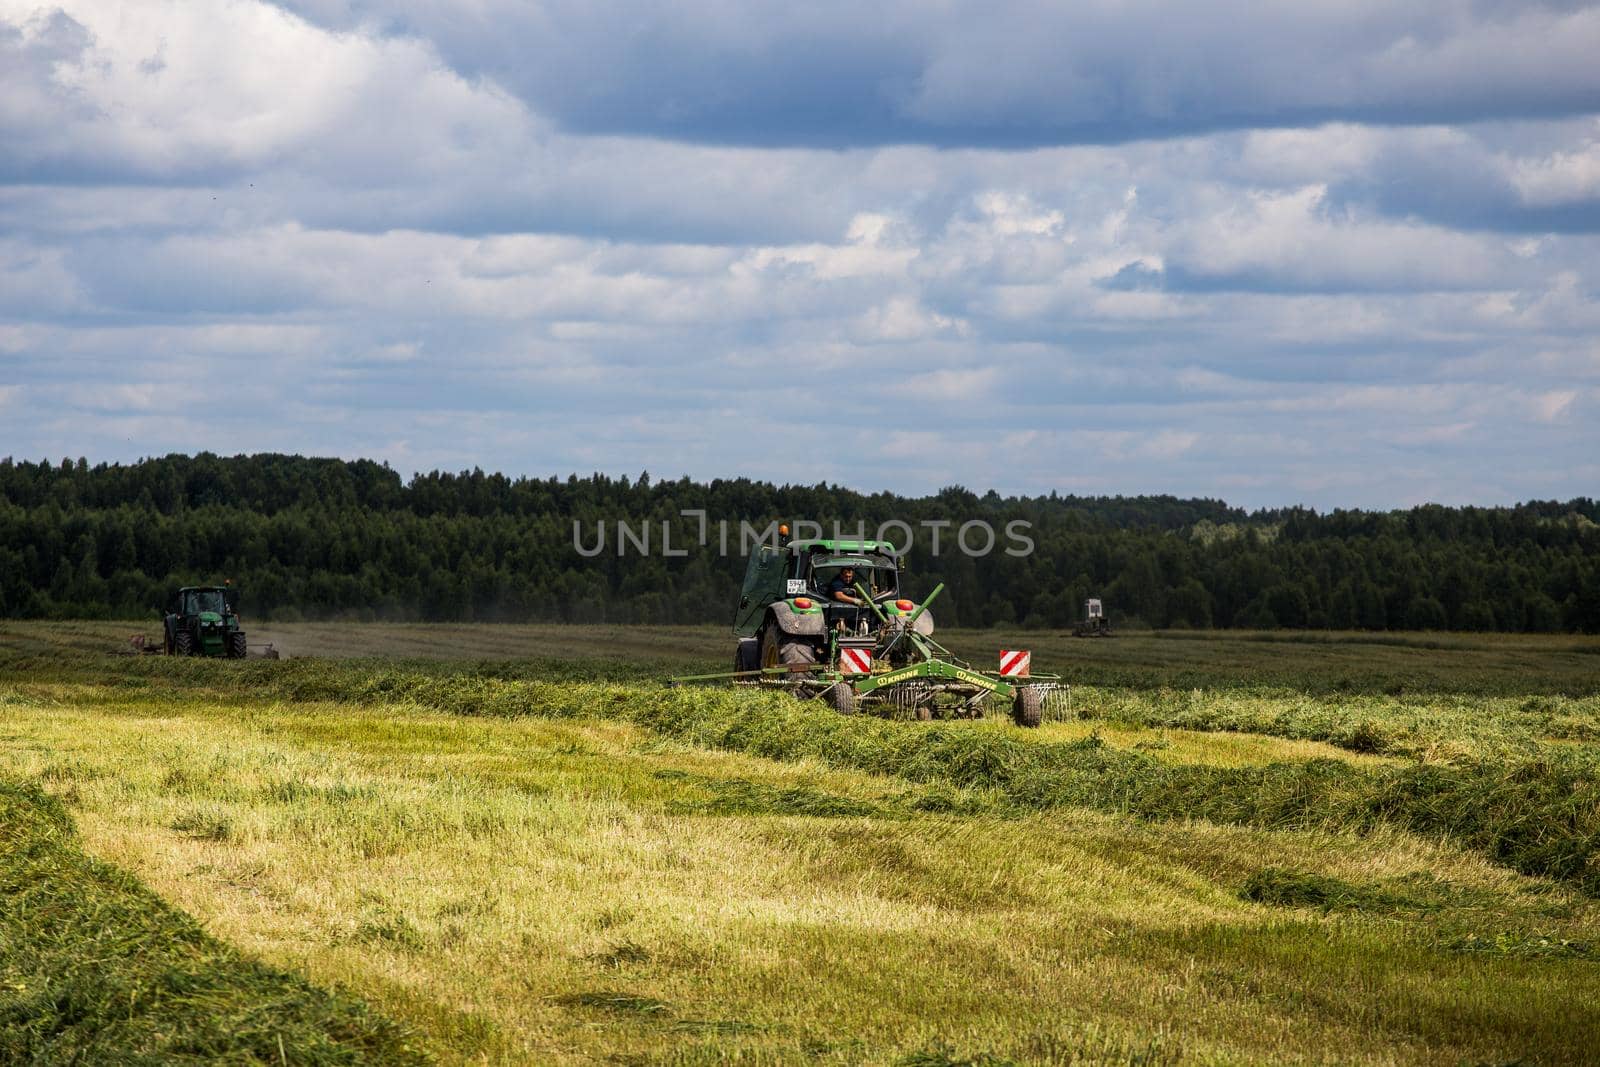 two green haymaking John Deere tractors with Krone plow on summer field before storm - telephoto shot with selective focus by z1b